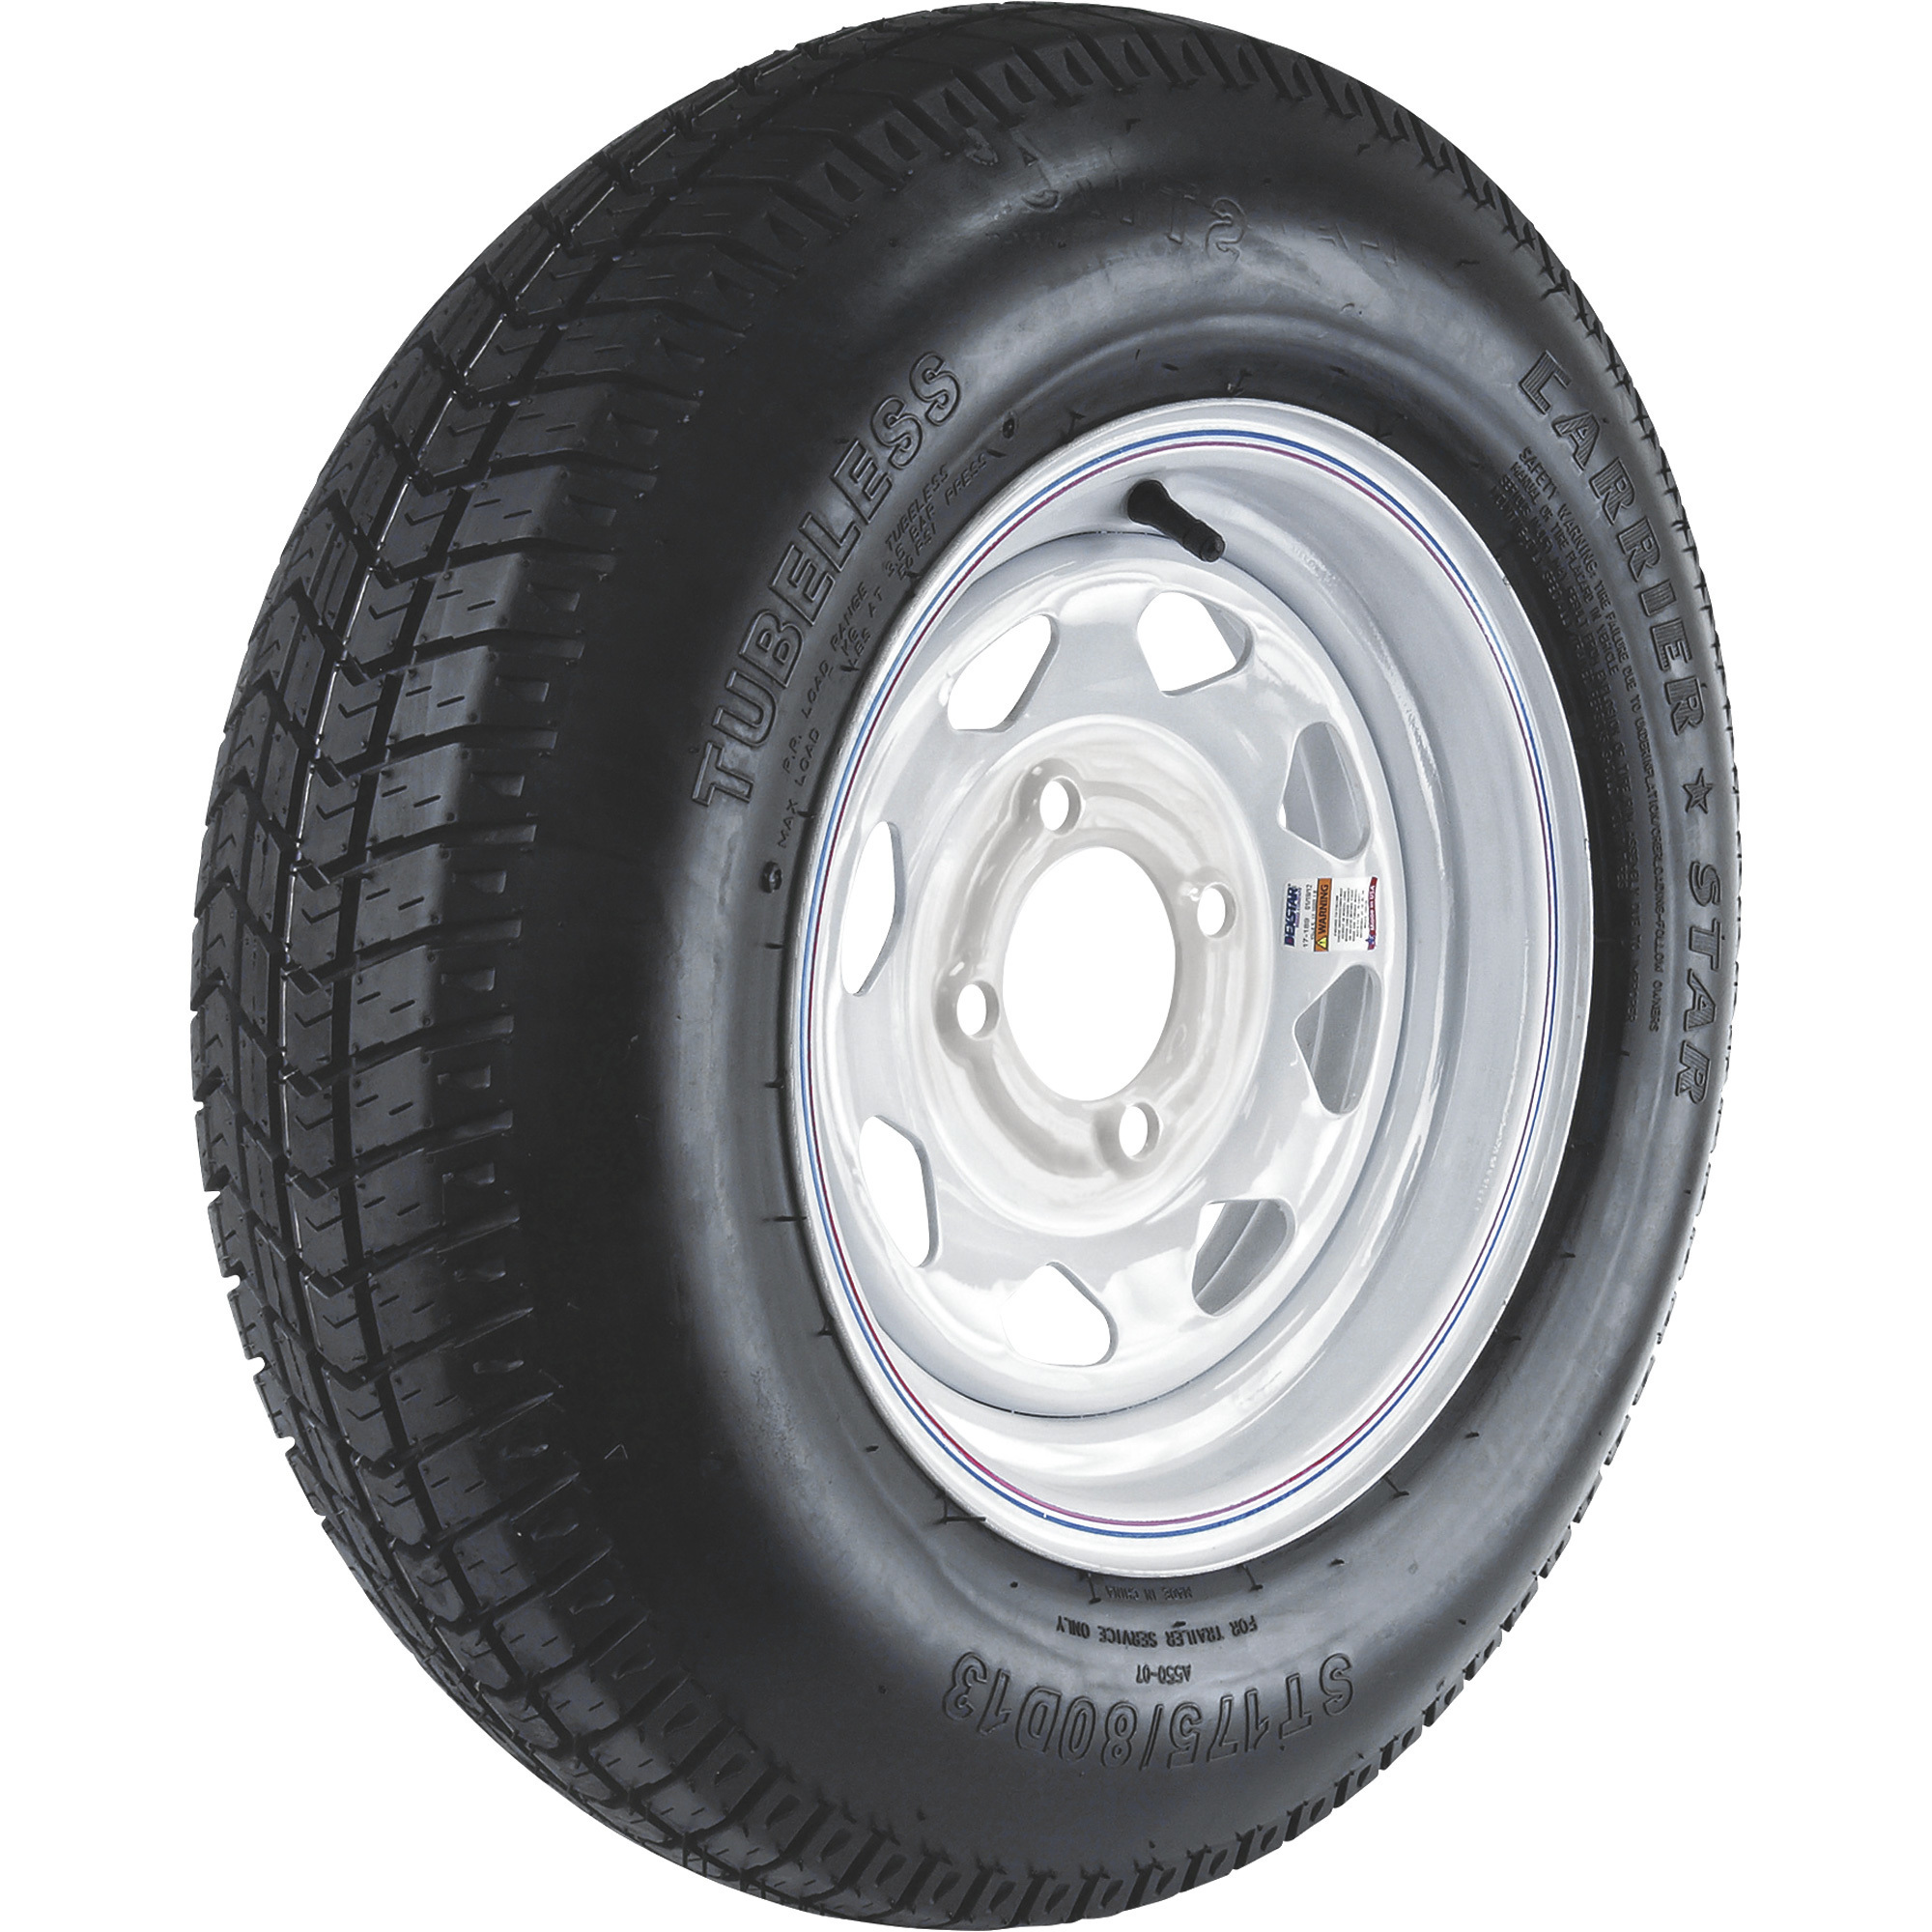 Martin Wheel Carrier Star 13Inch Bias-Ply Trailer Tire and Wheel Assembly â ST175/80D-13, 4-Hole, Load Range C, Model DM175D3C-4CIN